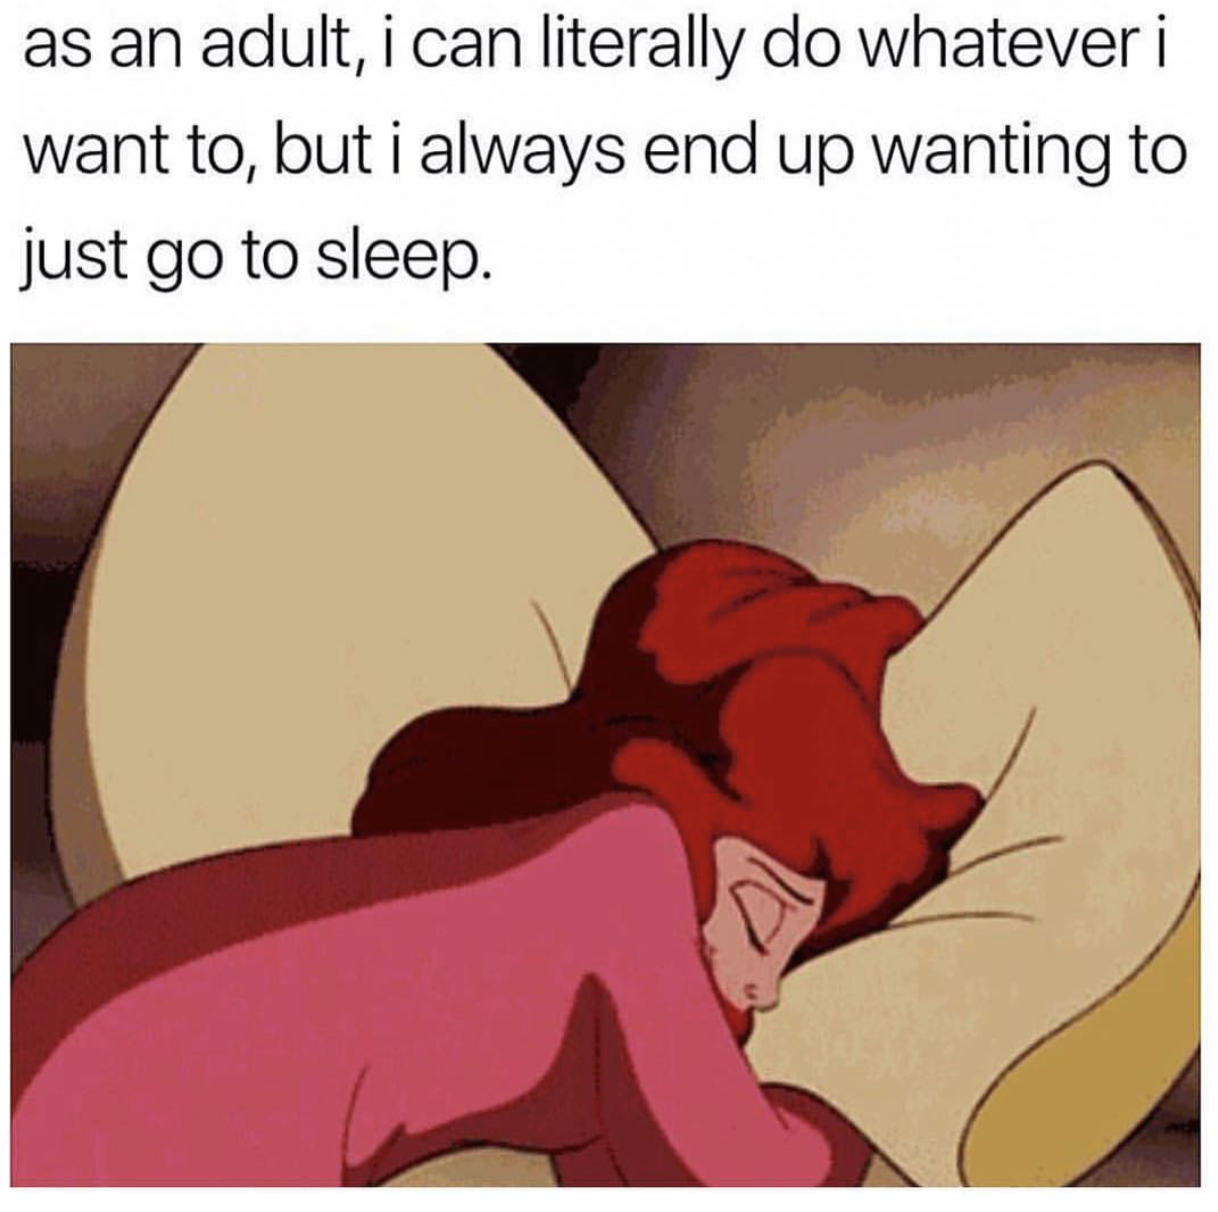 meme adult sleep - as an adult, i can literally do whatever i want to, but i always end up wanting to just go to sleep.